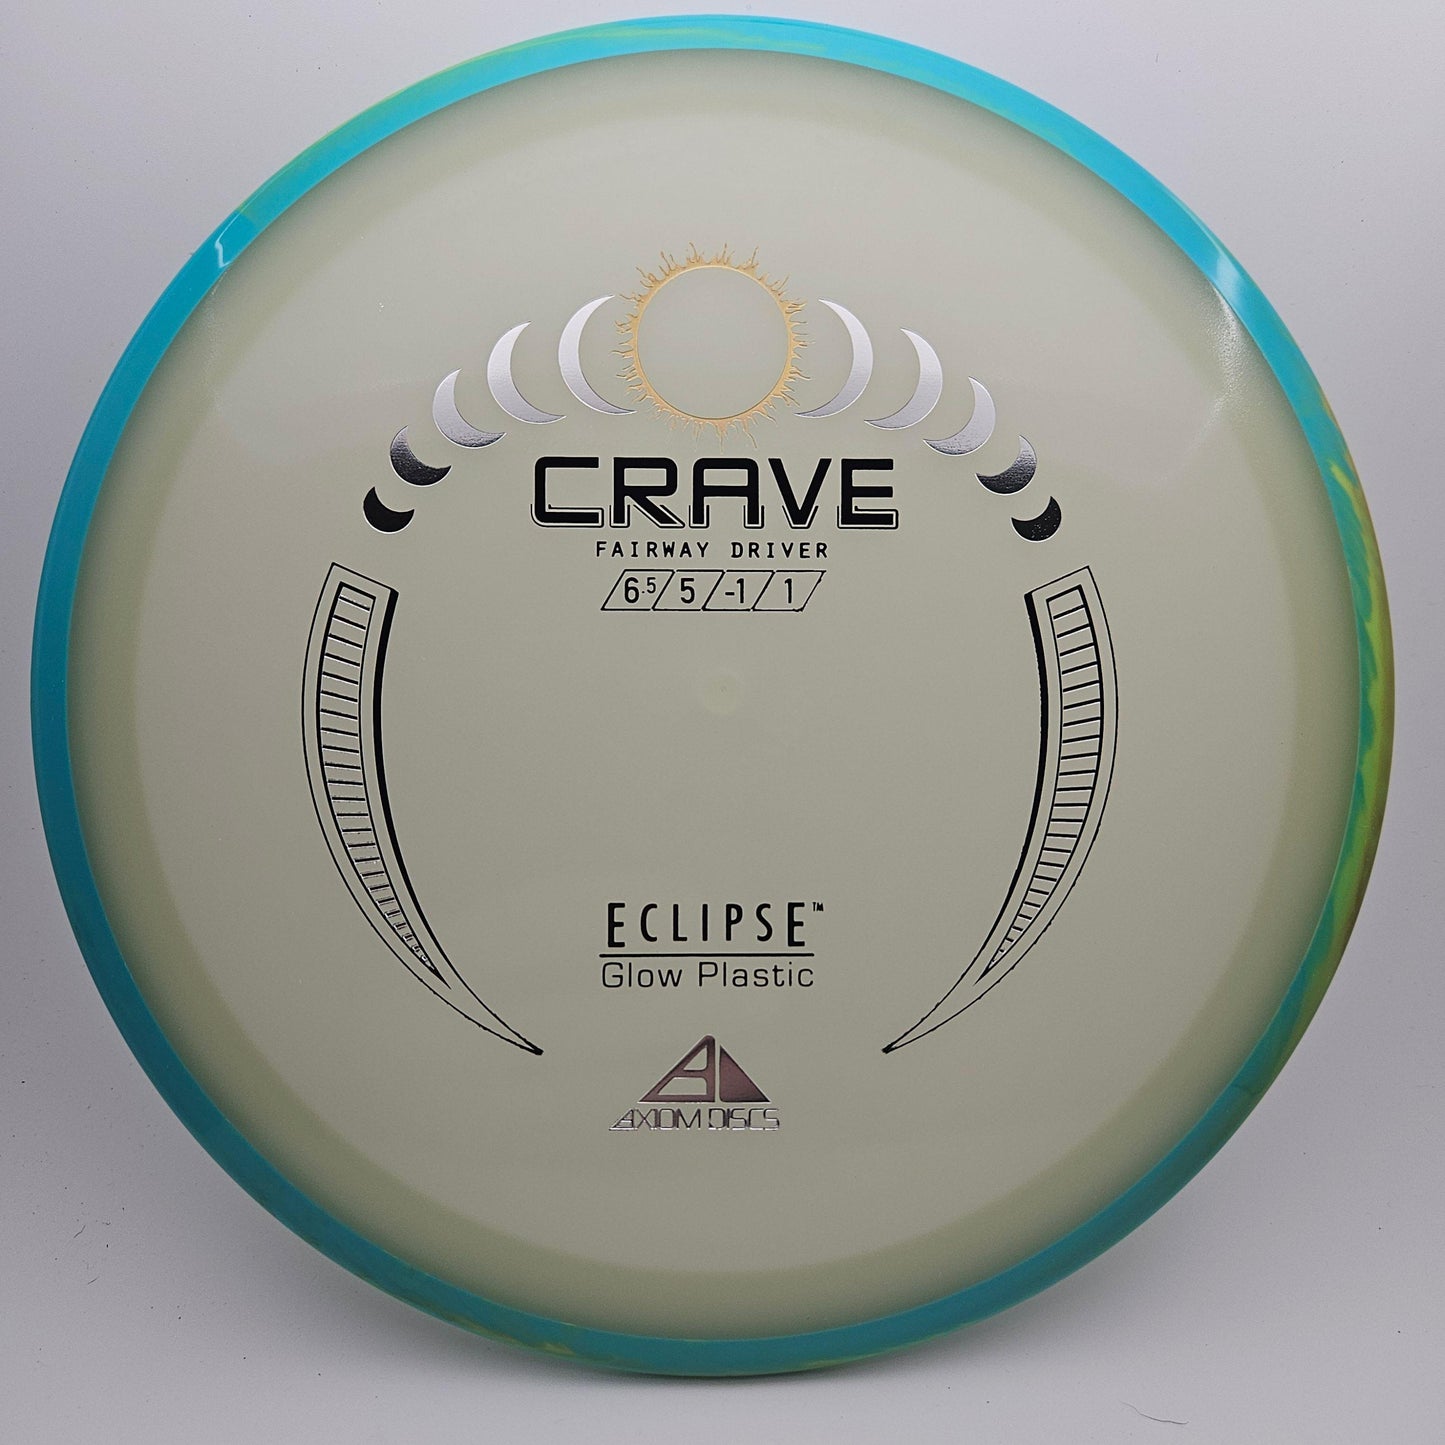 #4776 172g Glow / Teal / Green Eclipse Crave